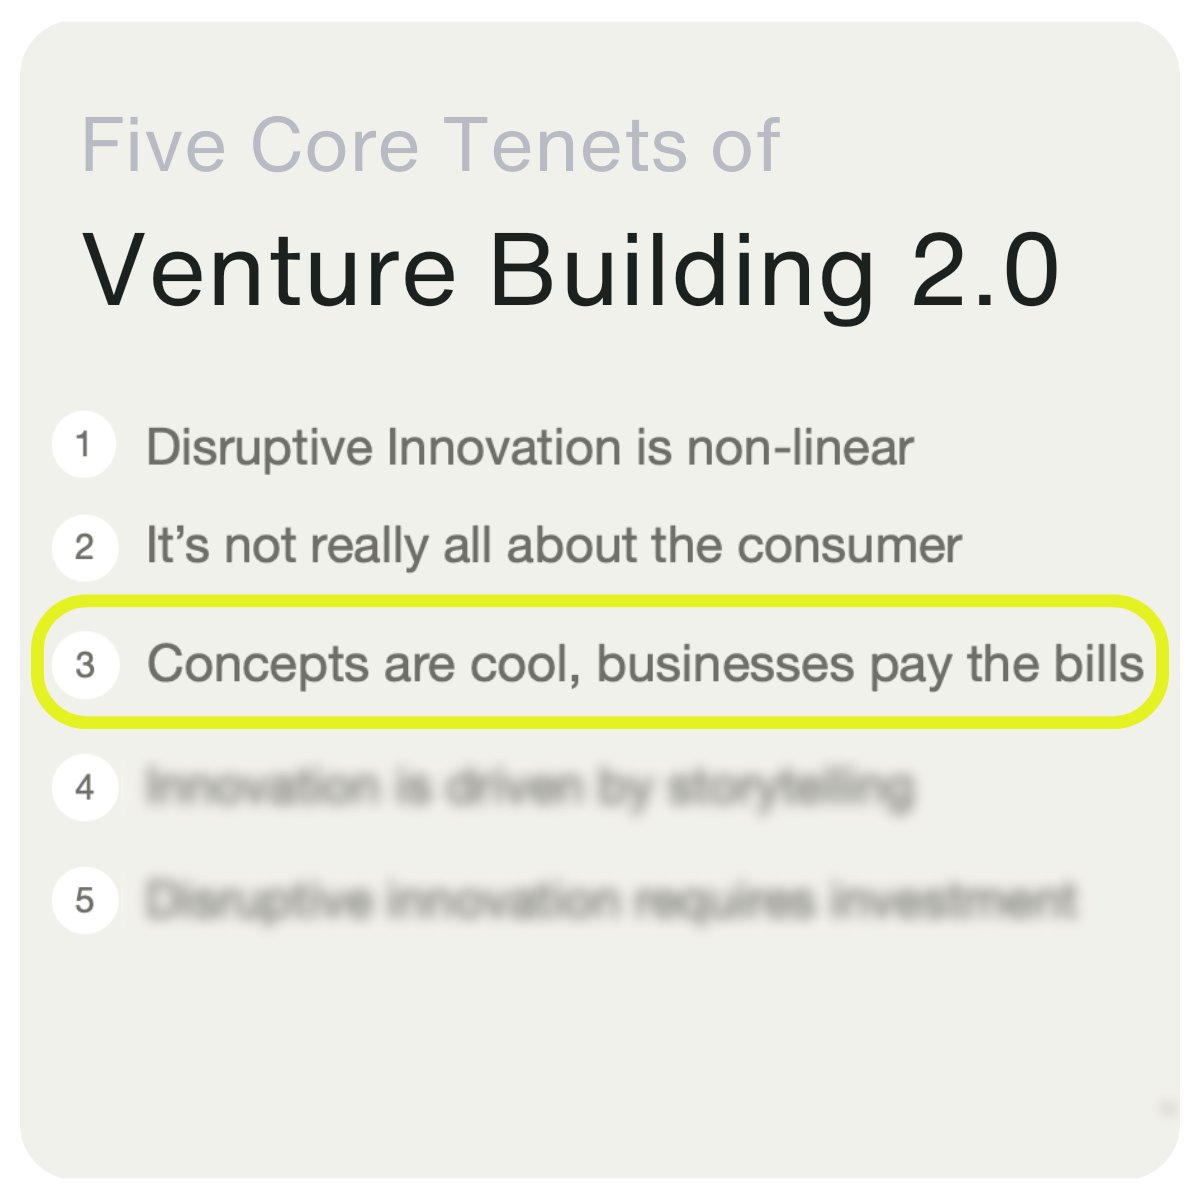 Key #VentureBuilding Principles [part 3/5]:
➡️ Concepts are great, but it’s all about the business plan 
This means nailing down your business basics—economics, market strategy, and how to scale.

Dive deeper: hubs.li/Q02tFBvM0

#InnovationLeadership #StrategicInnovation